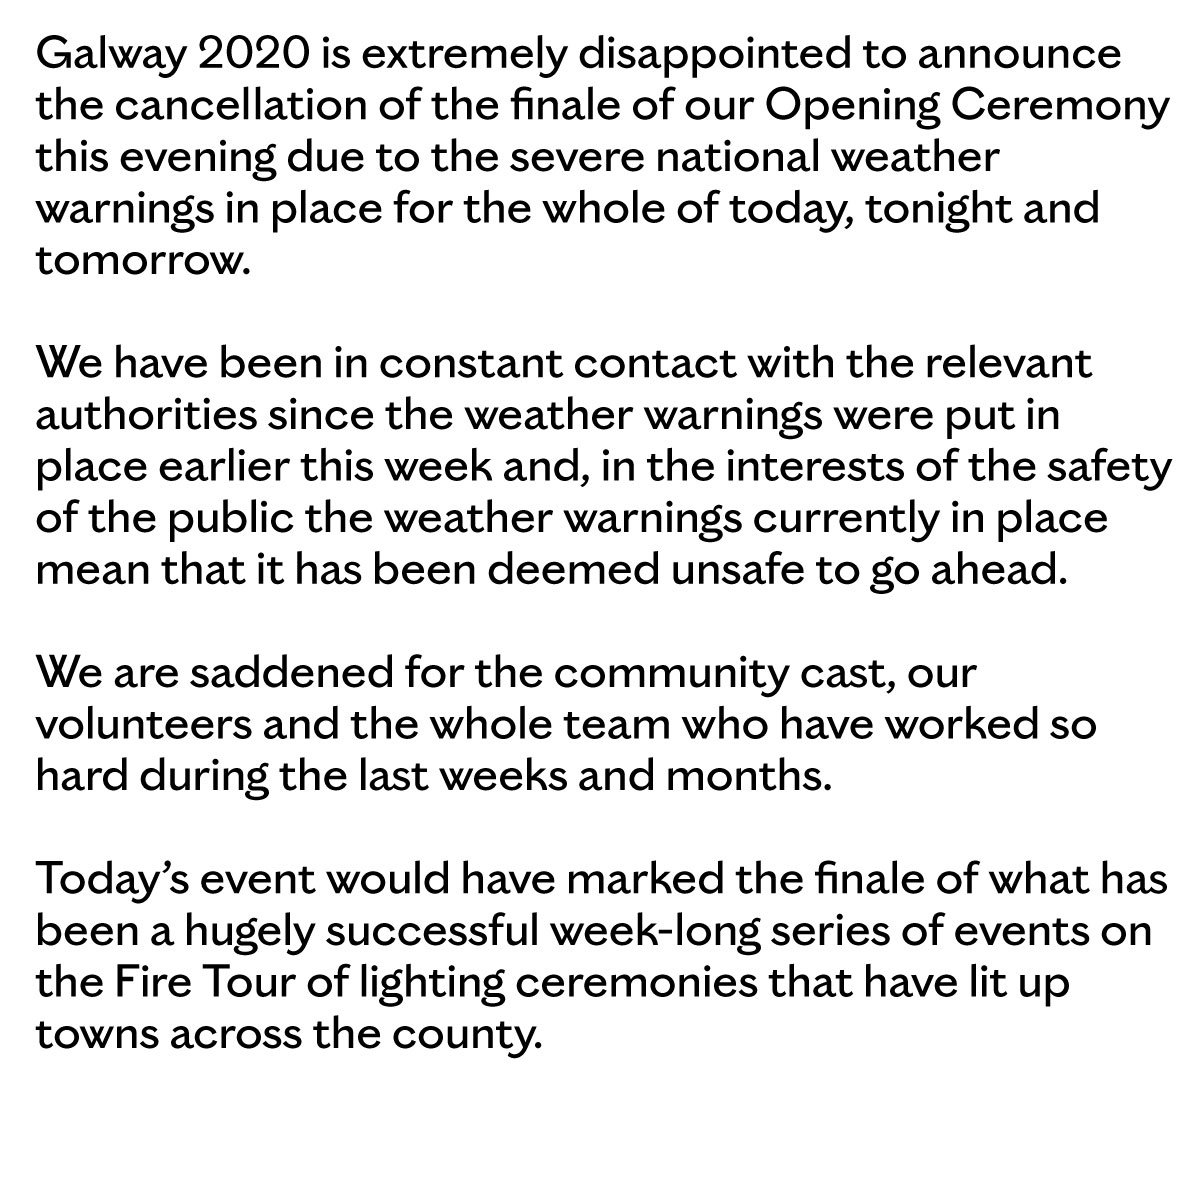 Galway 2020 is extremely disappointed to announce the cancellation of the finale of our Opening Ceremony this evening due to the severe national weather warnings in place for the whole of today, tonight and tomorrow. Full statement below. galway2020.ie/en/news/statem… #Galway2020